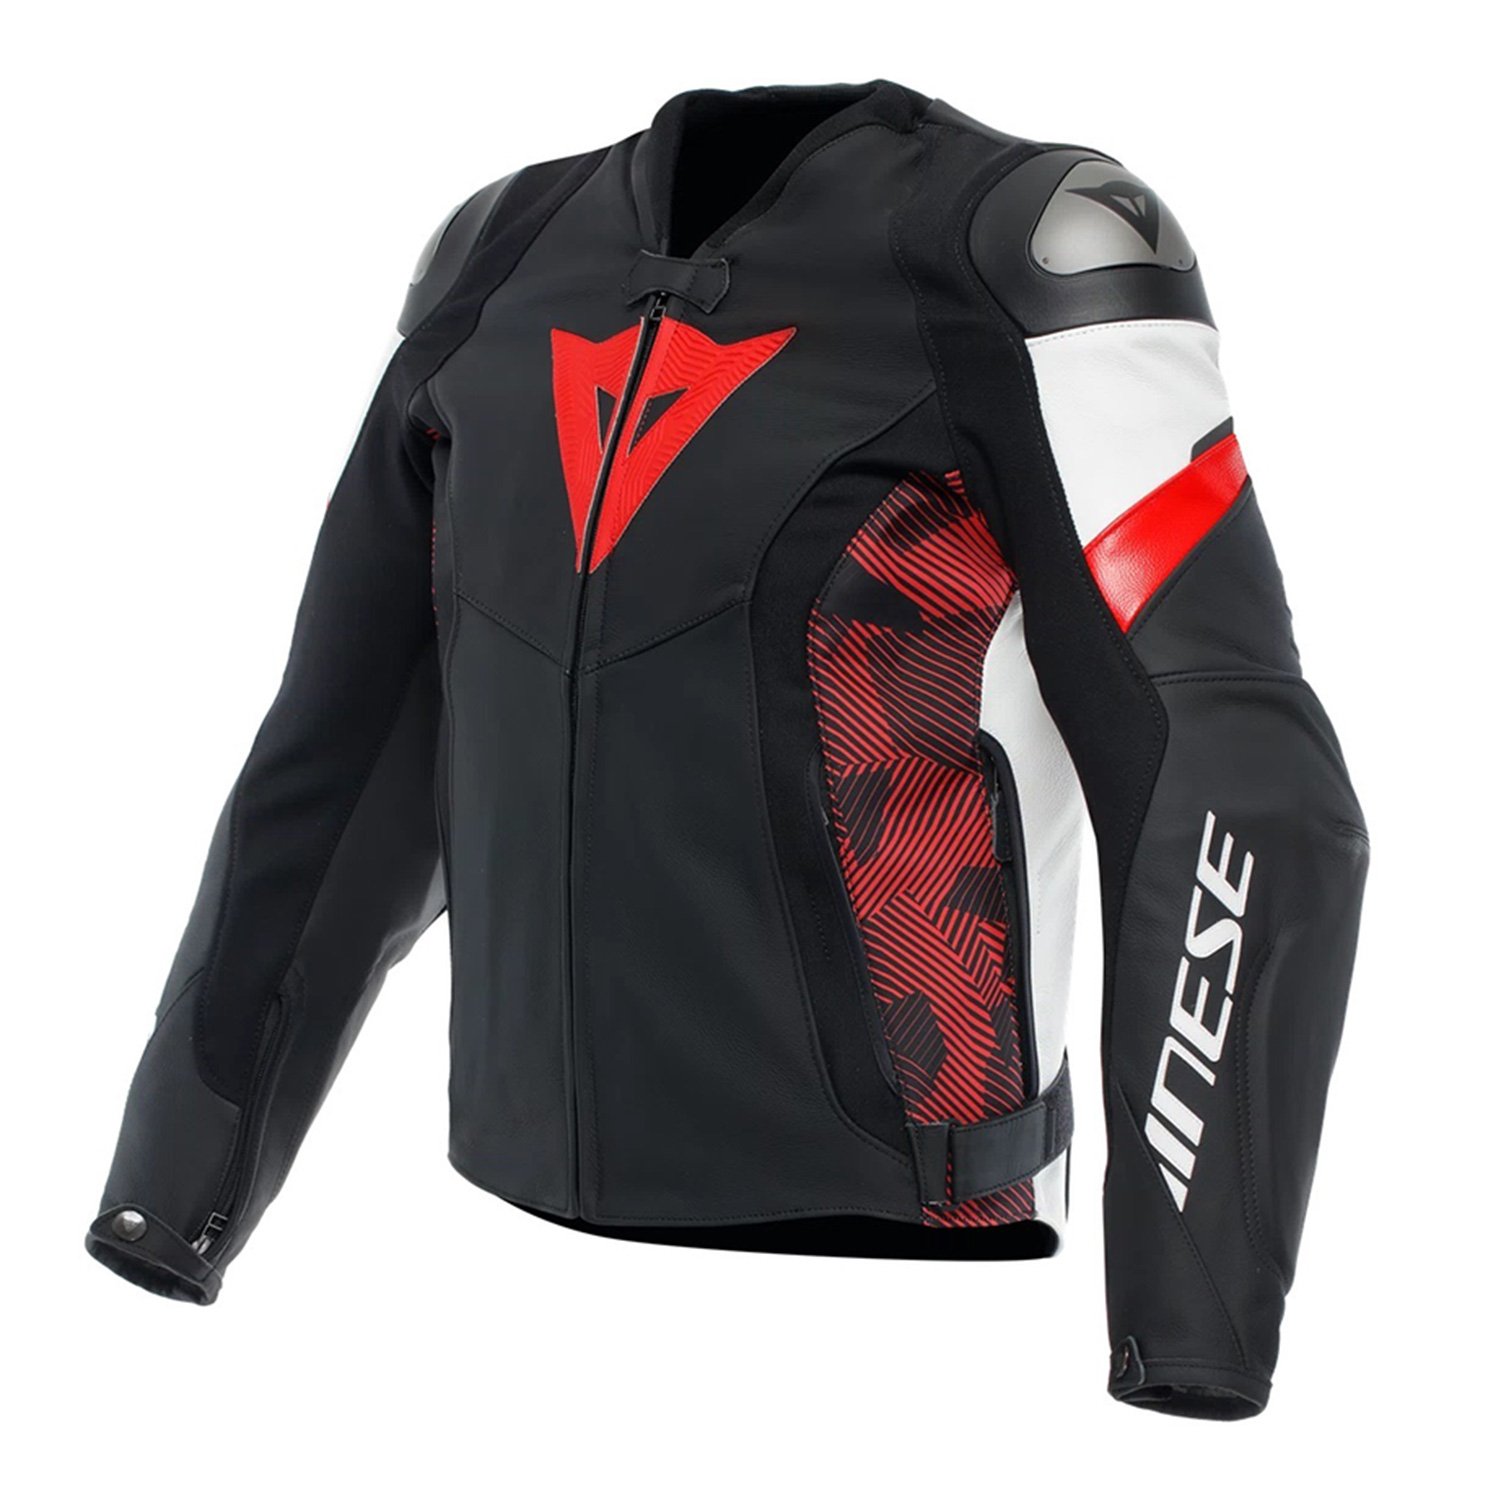 Image of Dainese Avro Leather 5 Jacket Black Red Lava White Size 64 ID 8051019639707